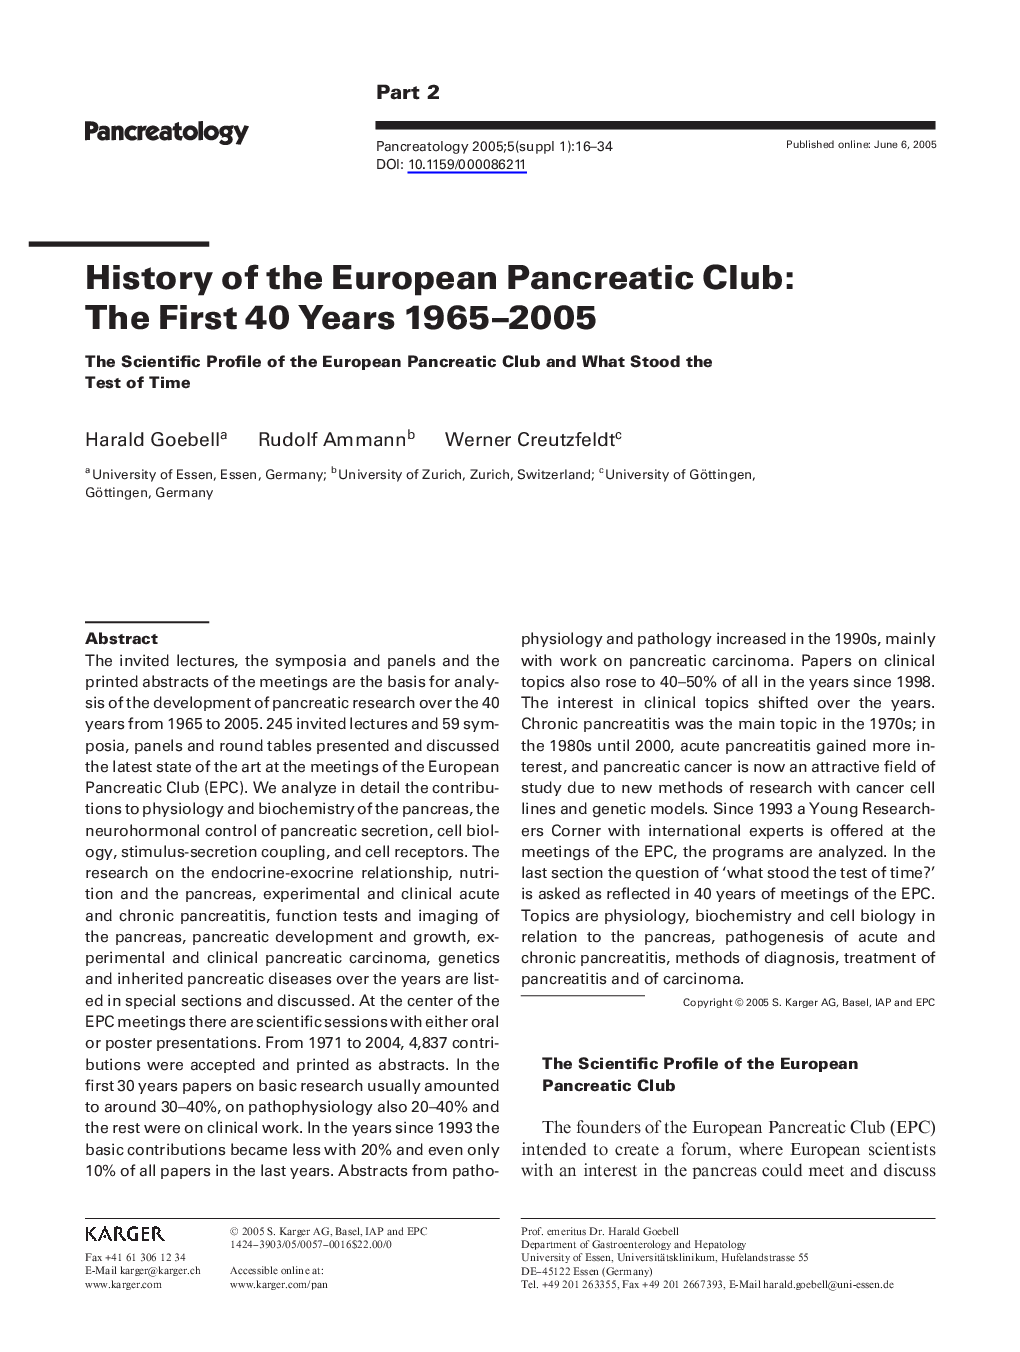 History of the European Pancreatic Club: The First 40 Years 1965-2005